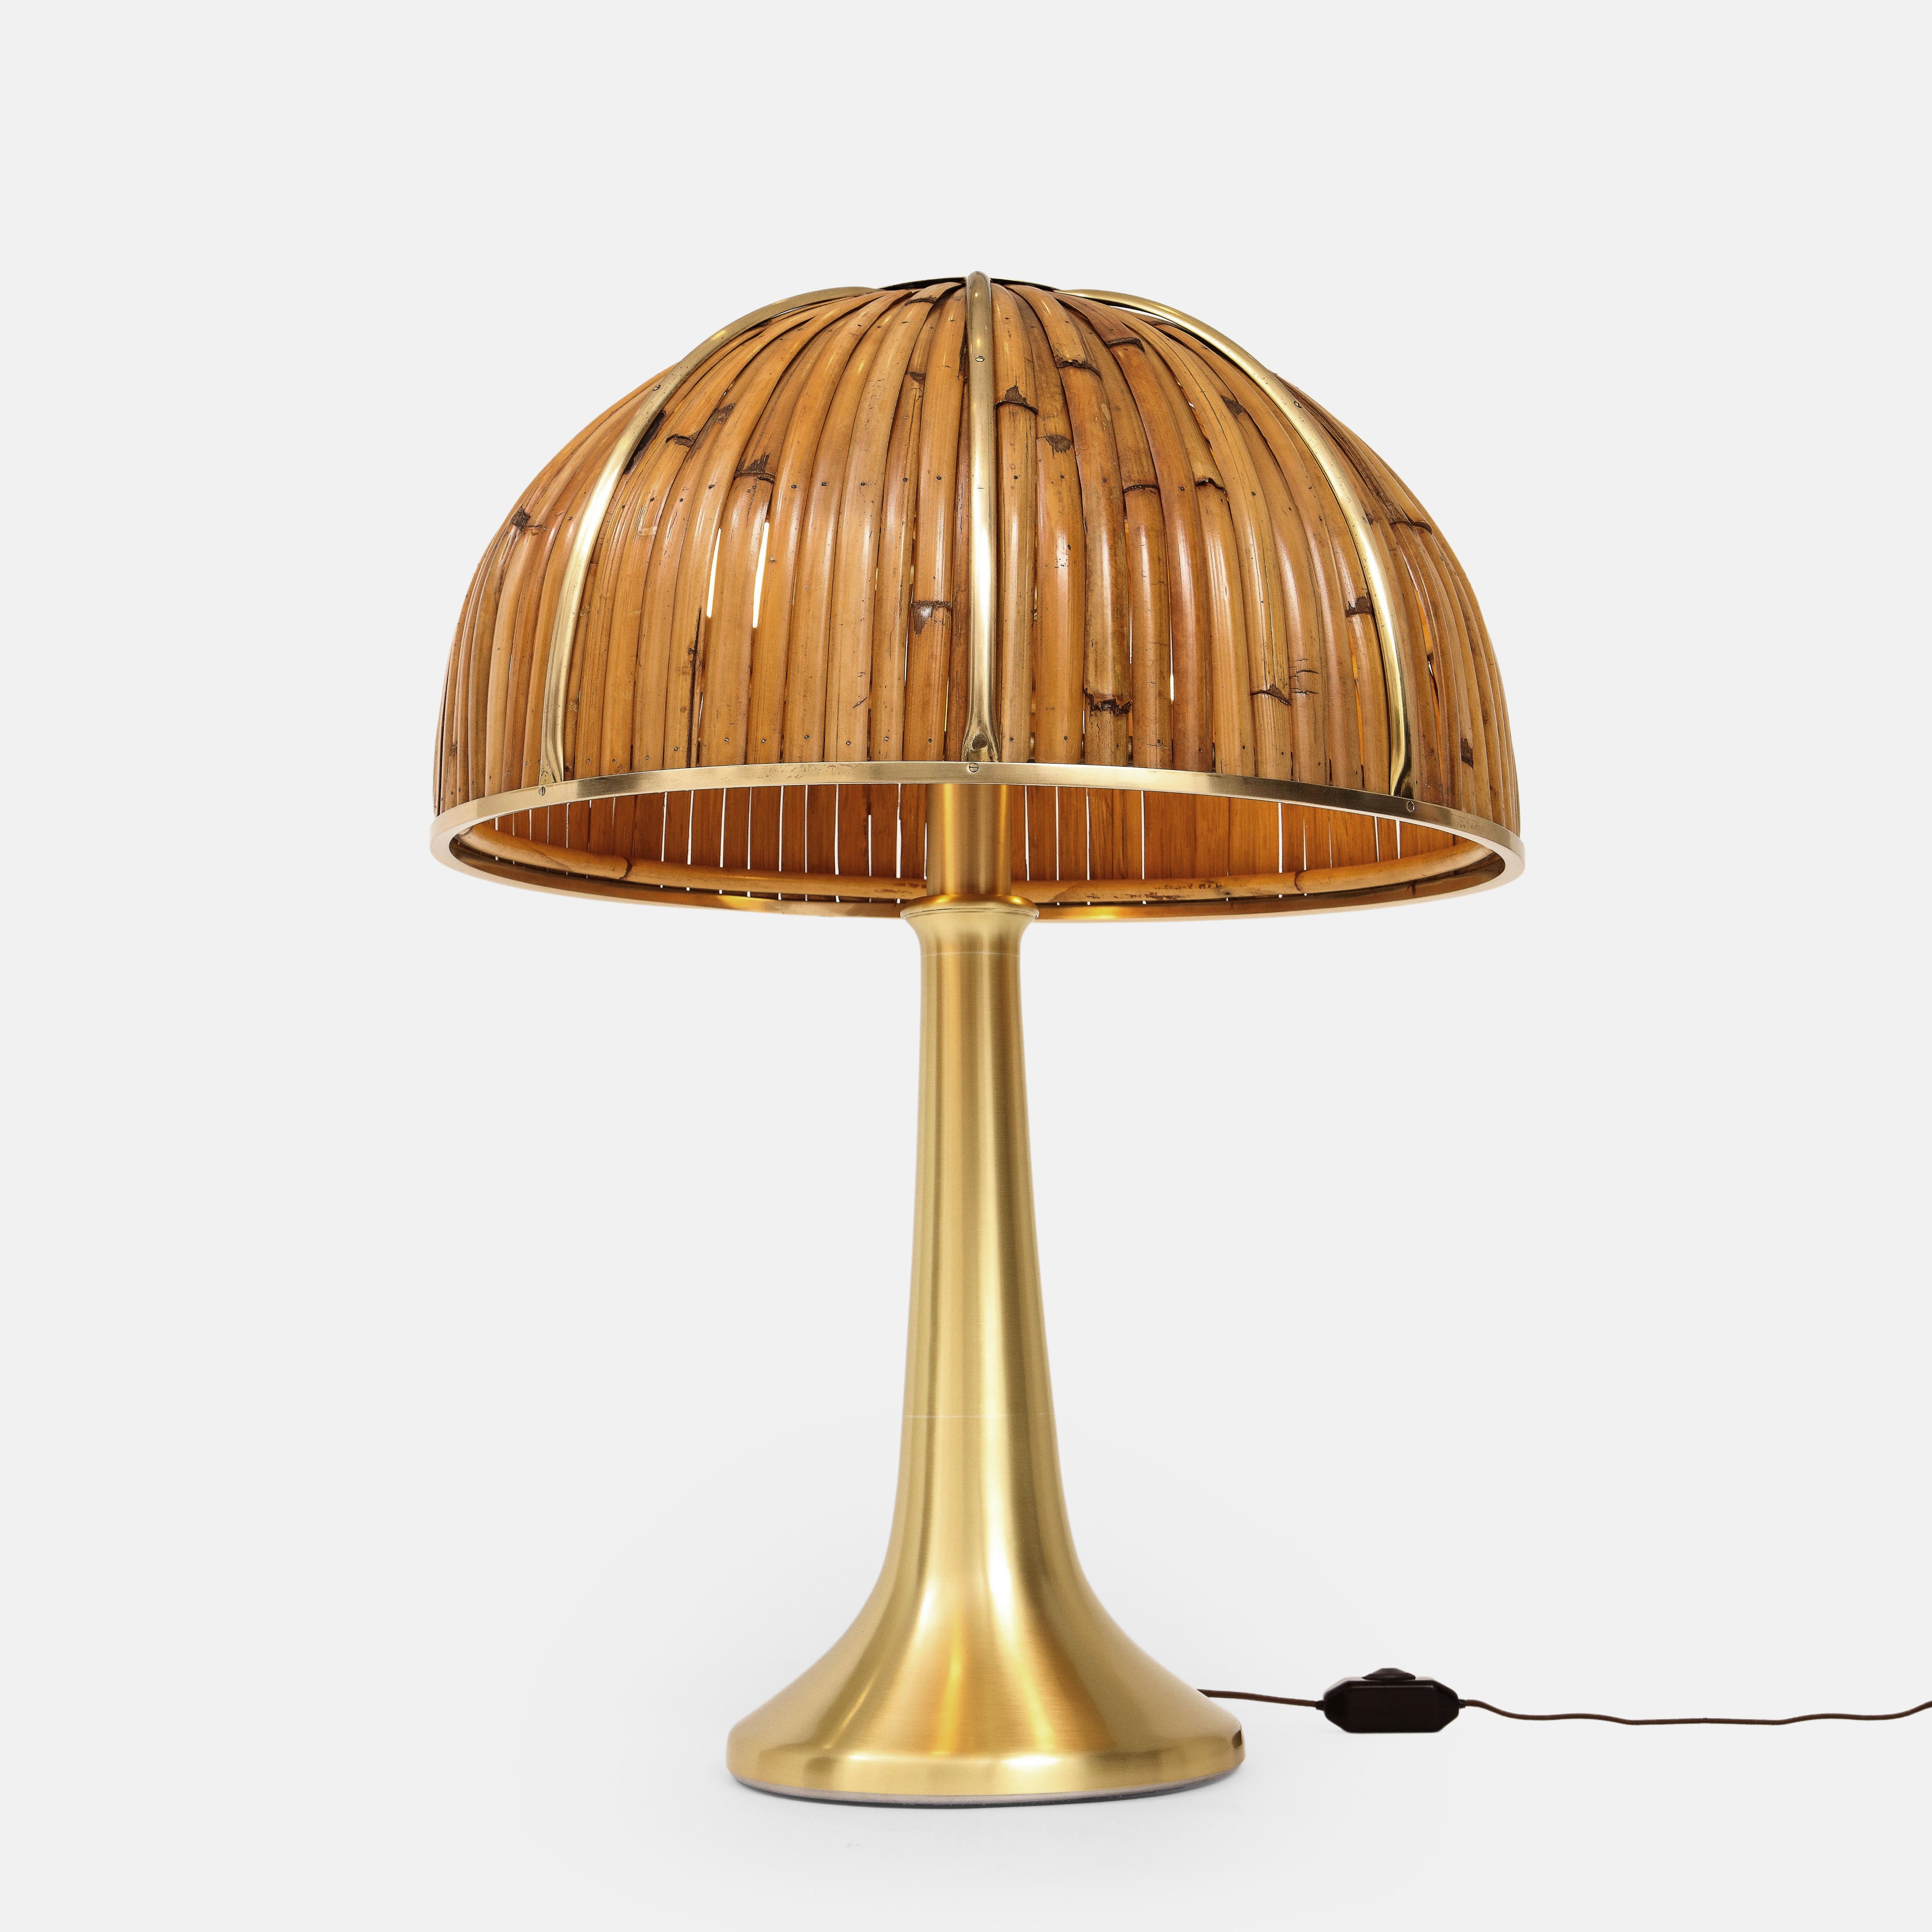 Late 20th Century Gabriella Crespi Rare Large 'Fungo' Table Lamp in Bamboo and Brass, Italy, 1970s